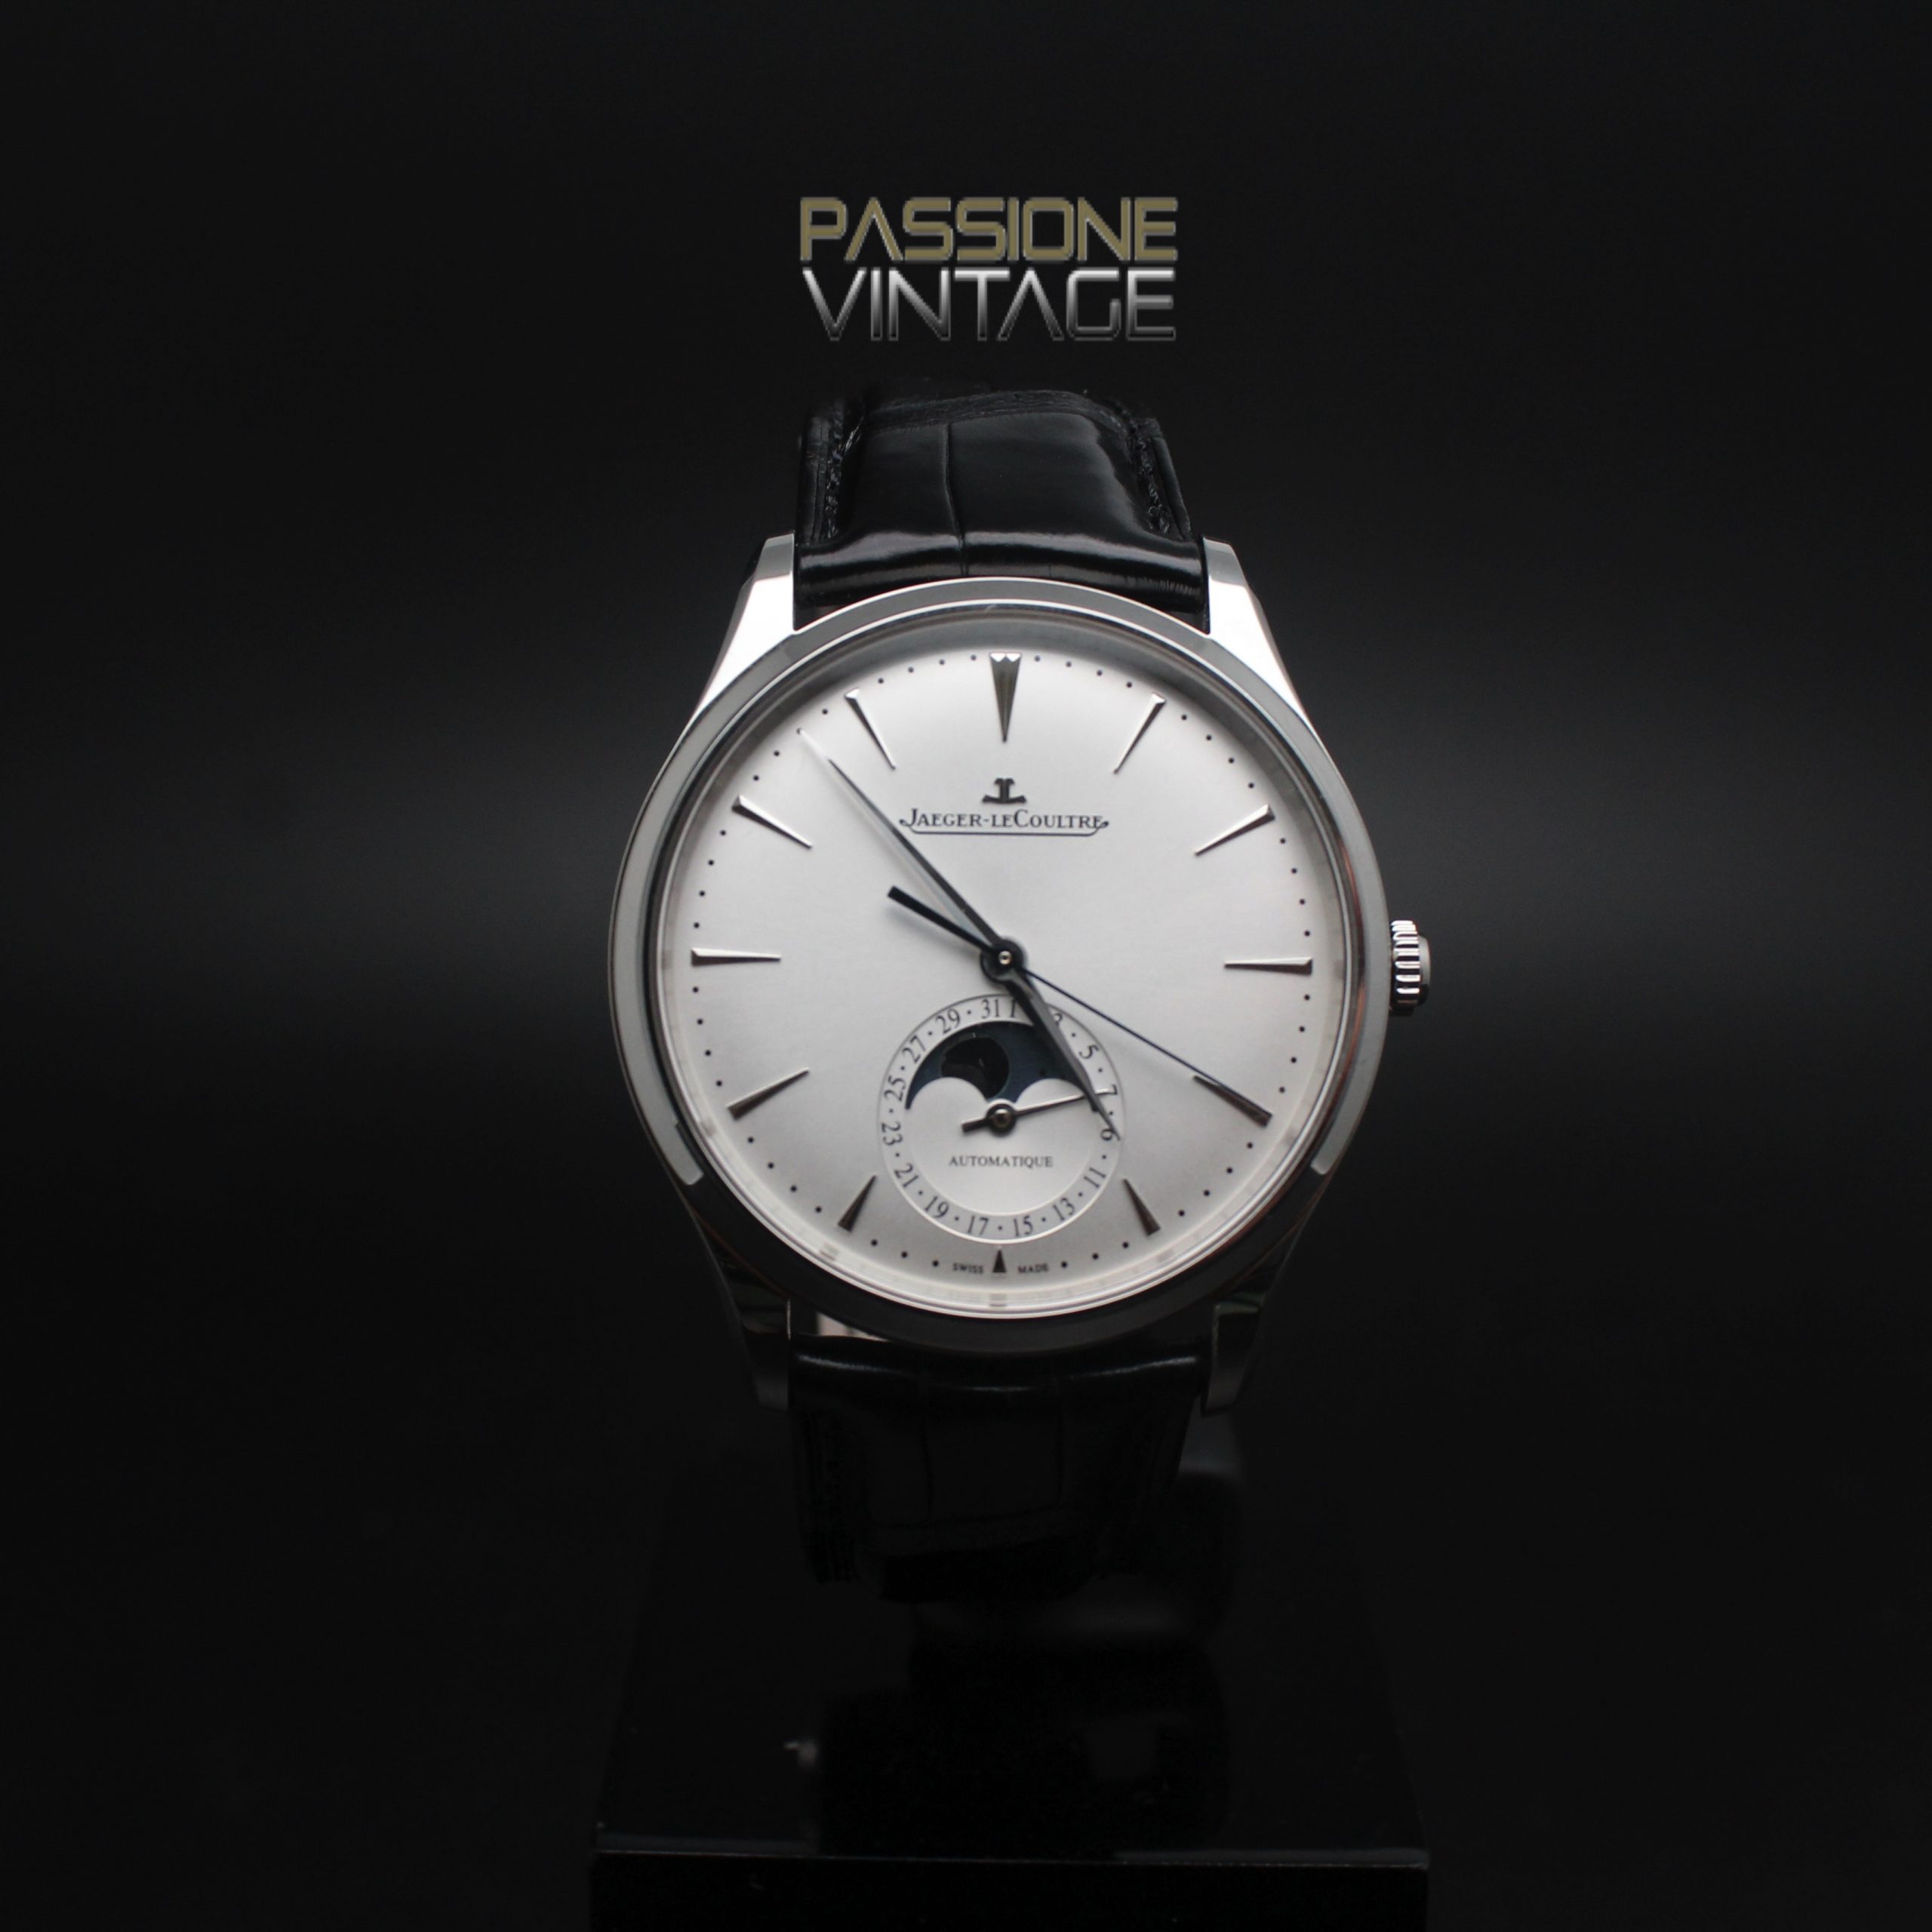 JAEGER-LE-COULTRE-MASTER-ULTRA-THIN-MOON-PV-PALERMO-7-scaled